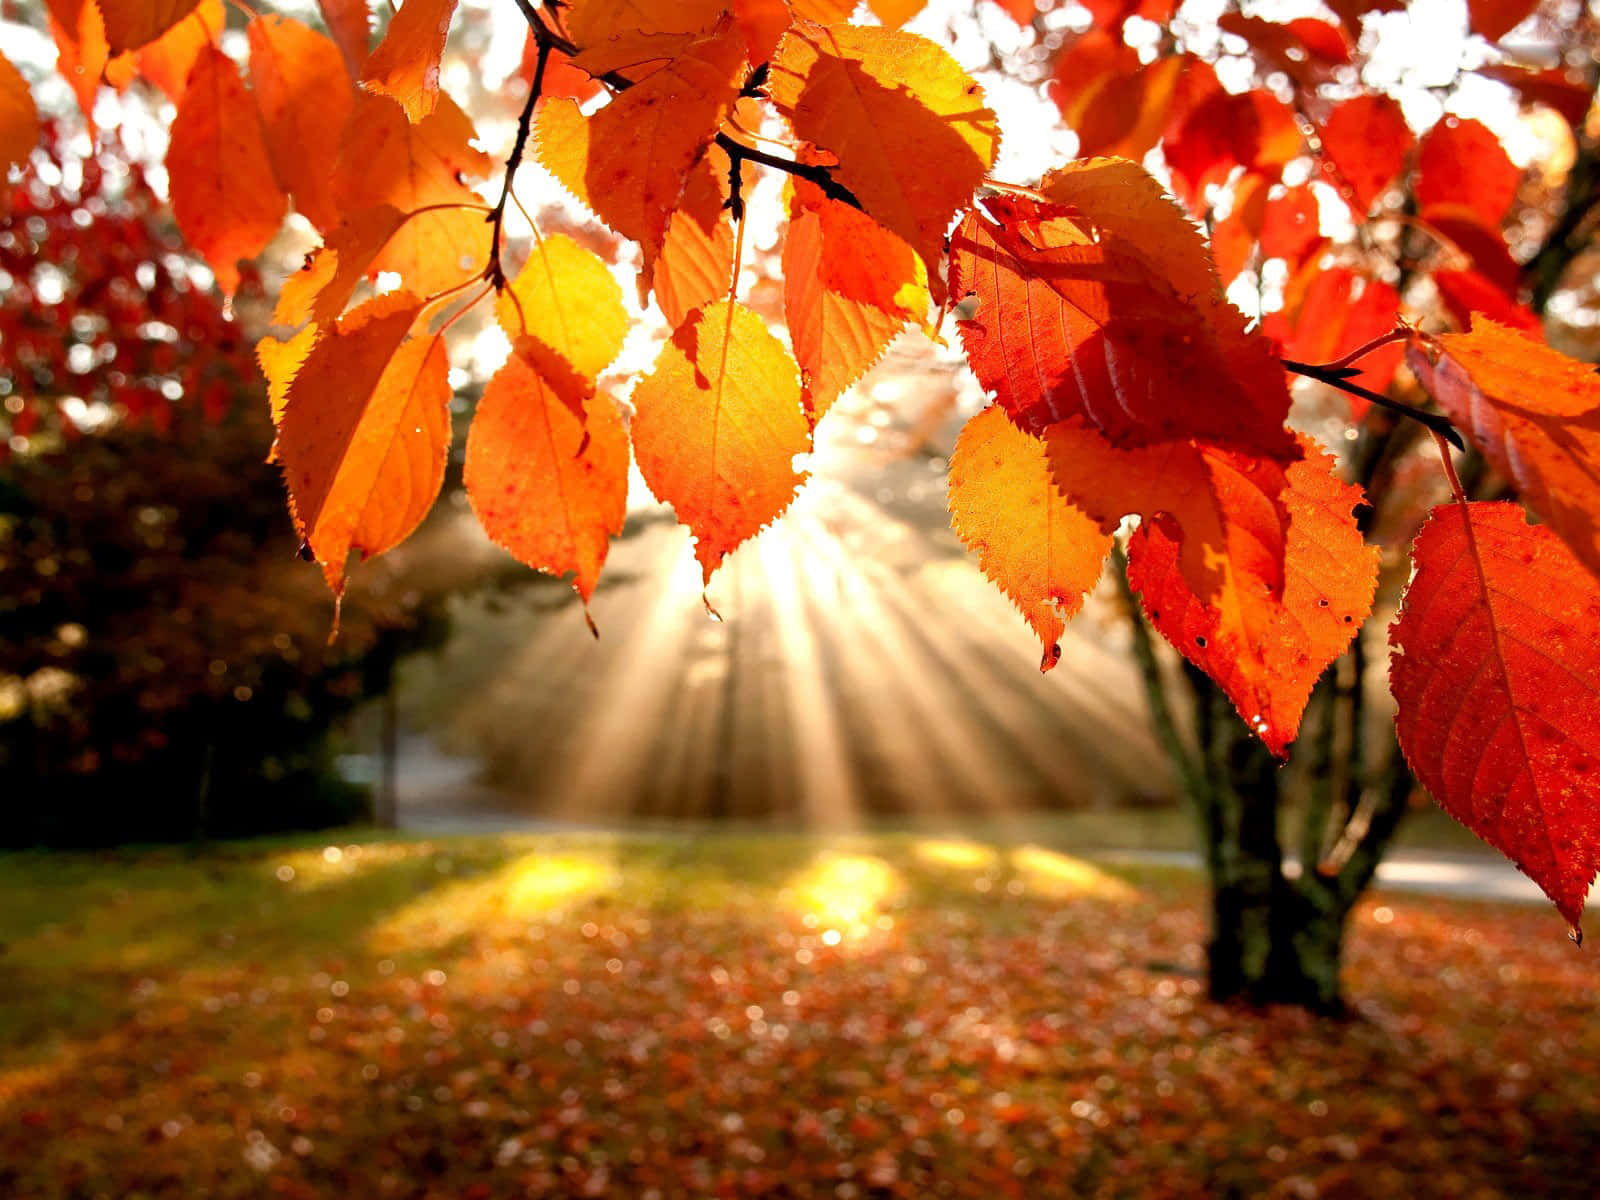 Autumn Leaves In The Sunlight